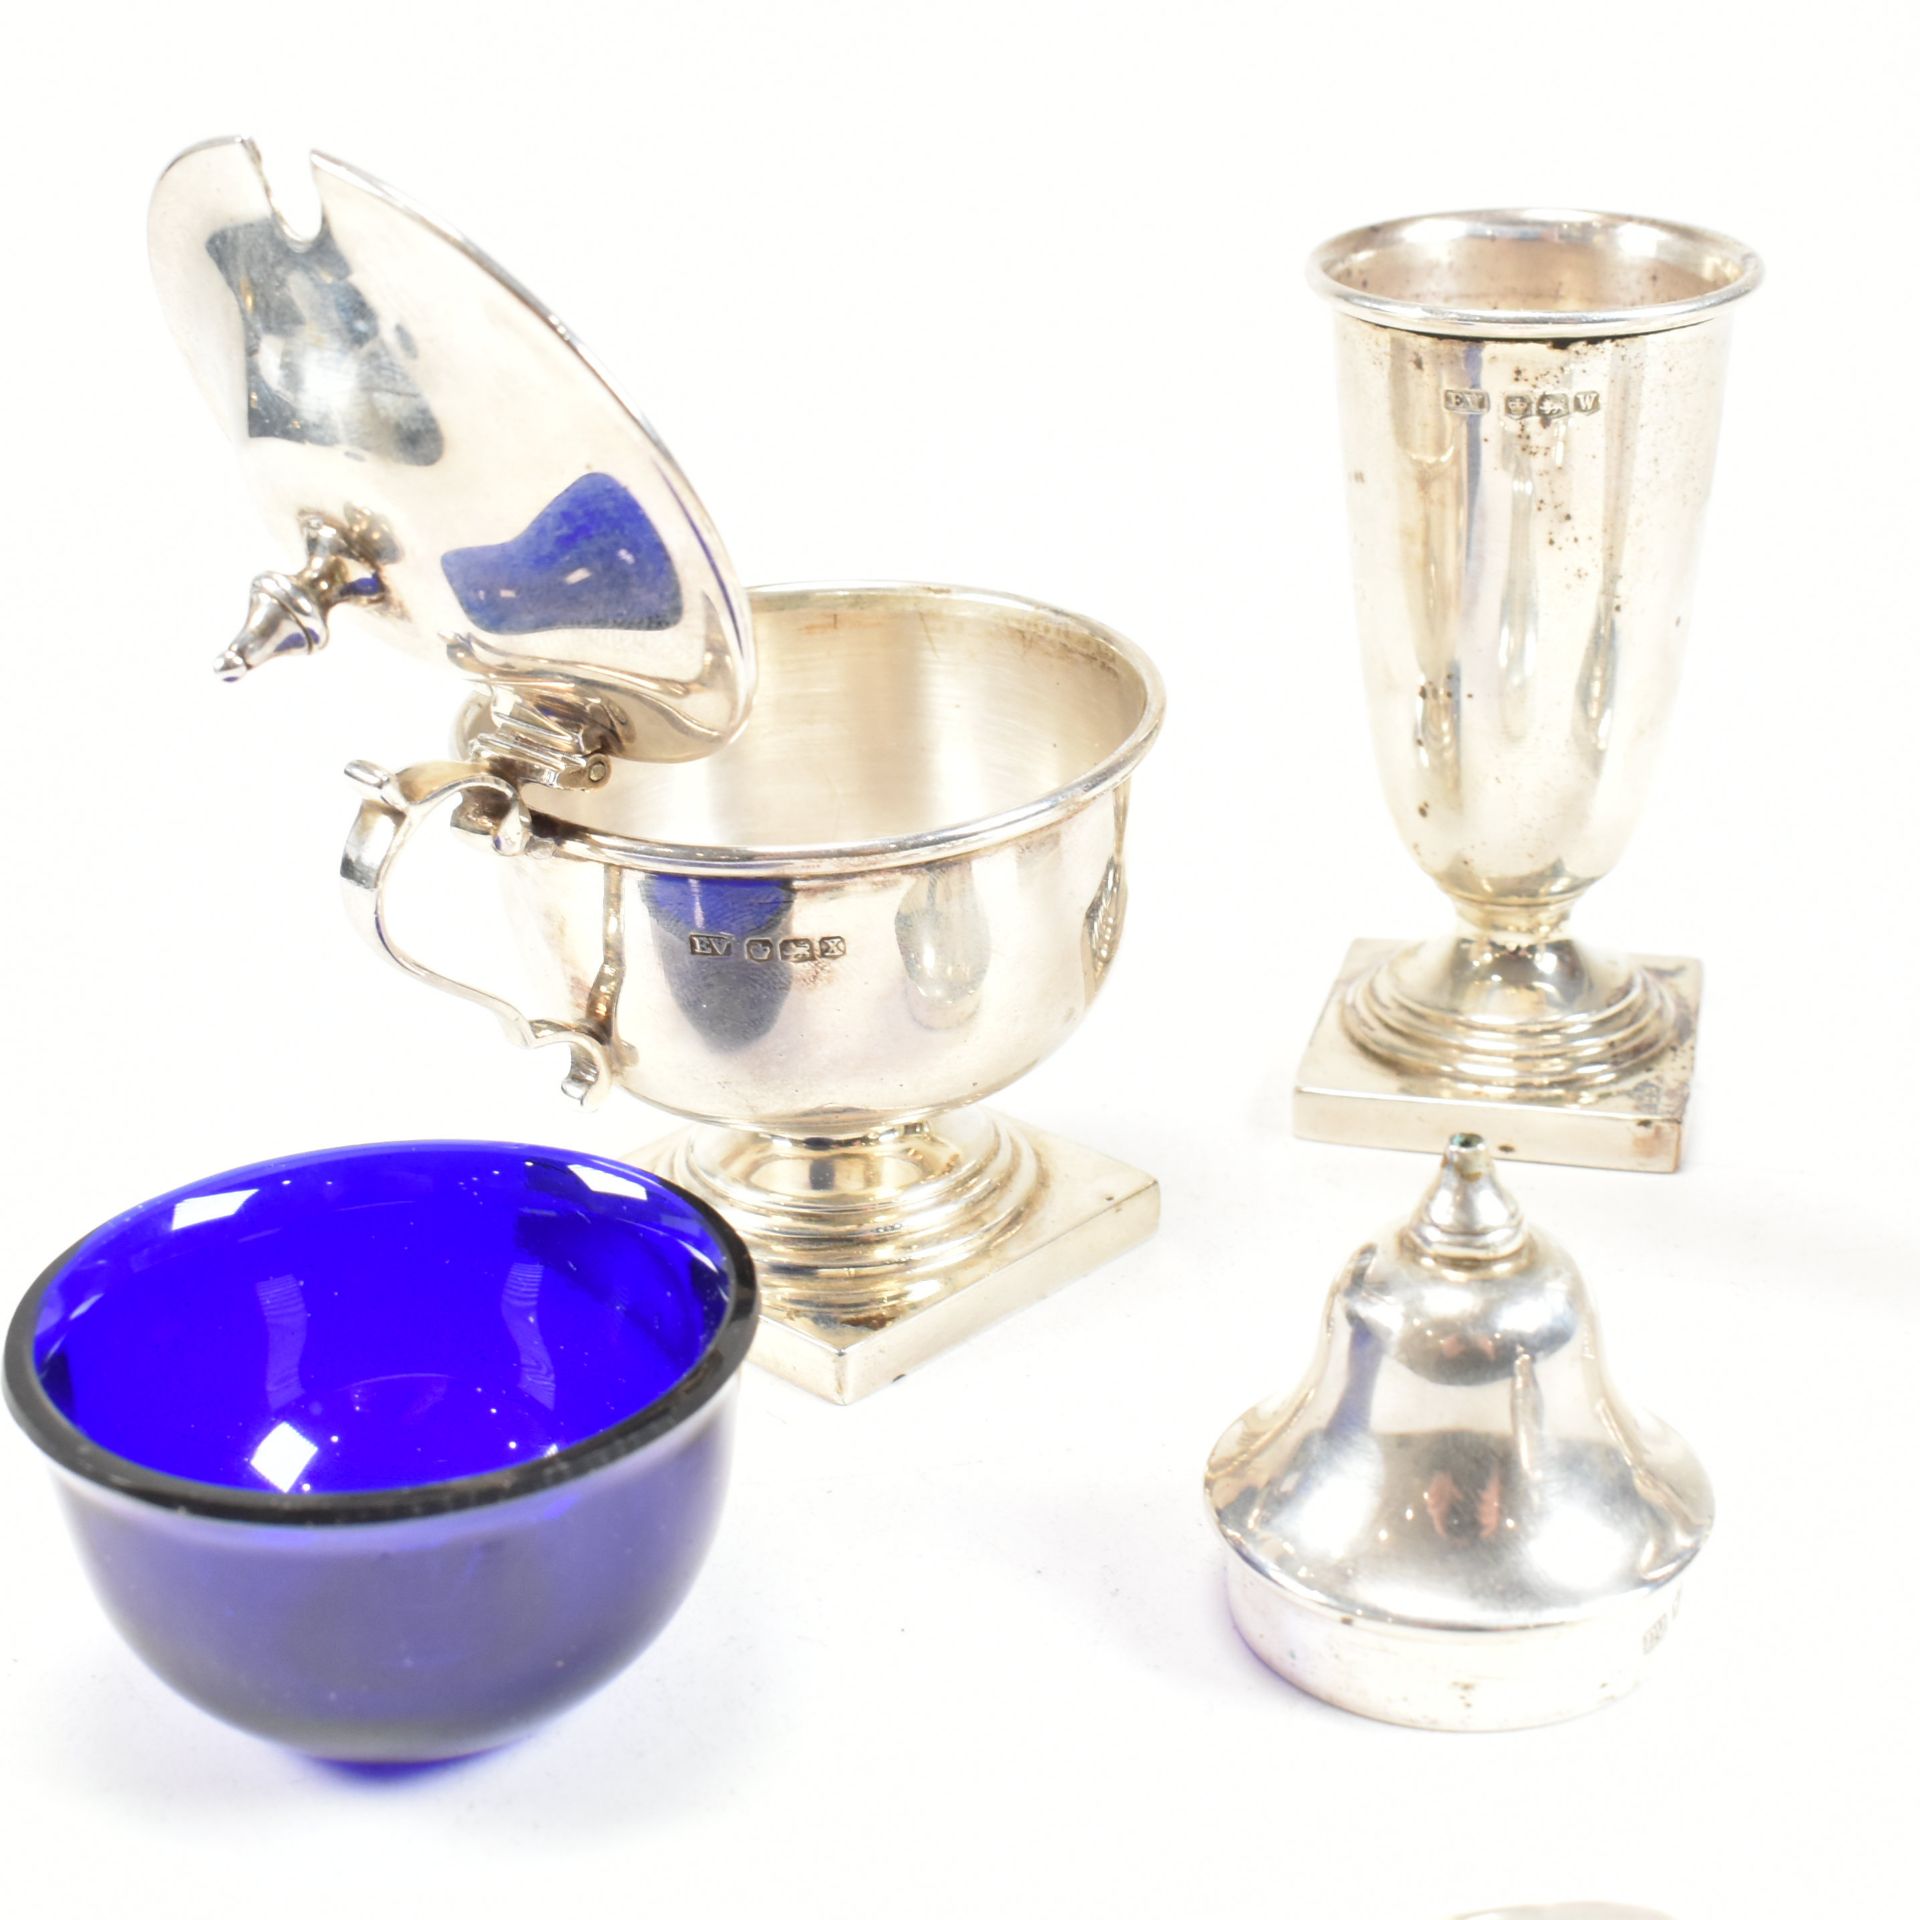 TWO EARLY 20TH CENTURY CASED HALLMARKED SILVER CRUET SETS - Image 9 of 9